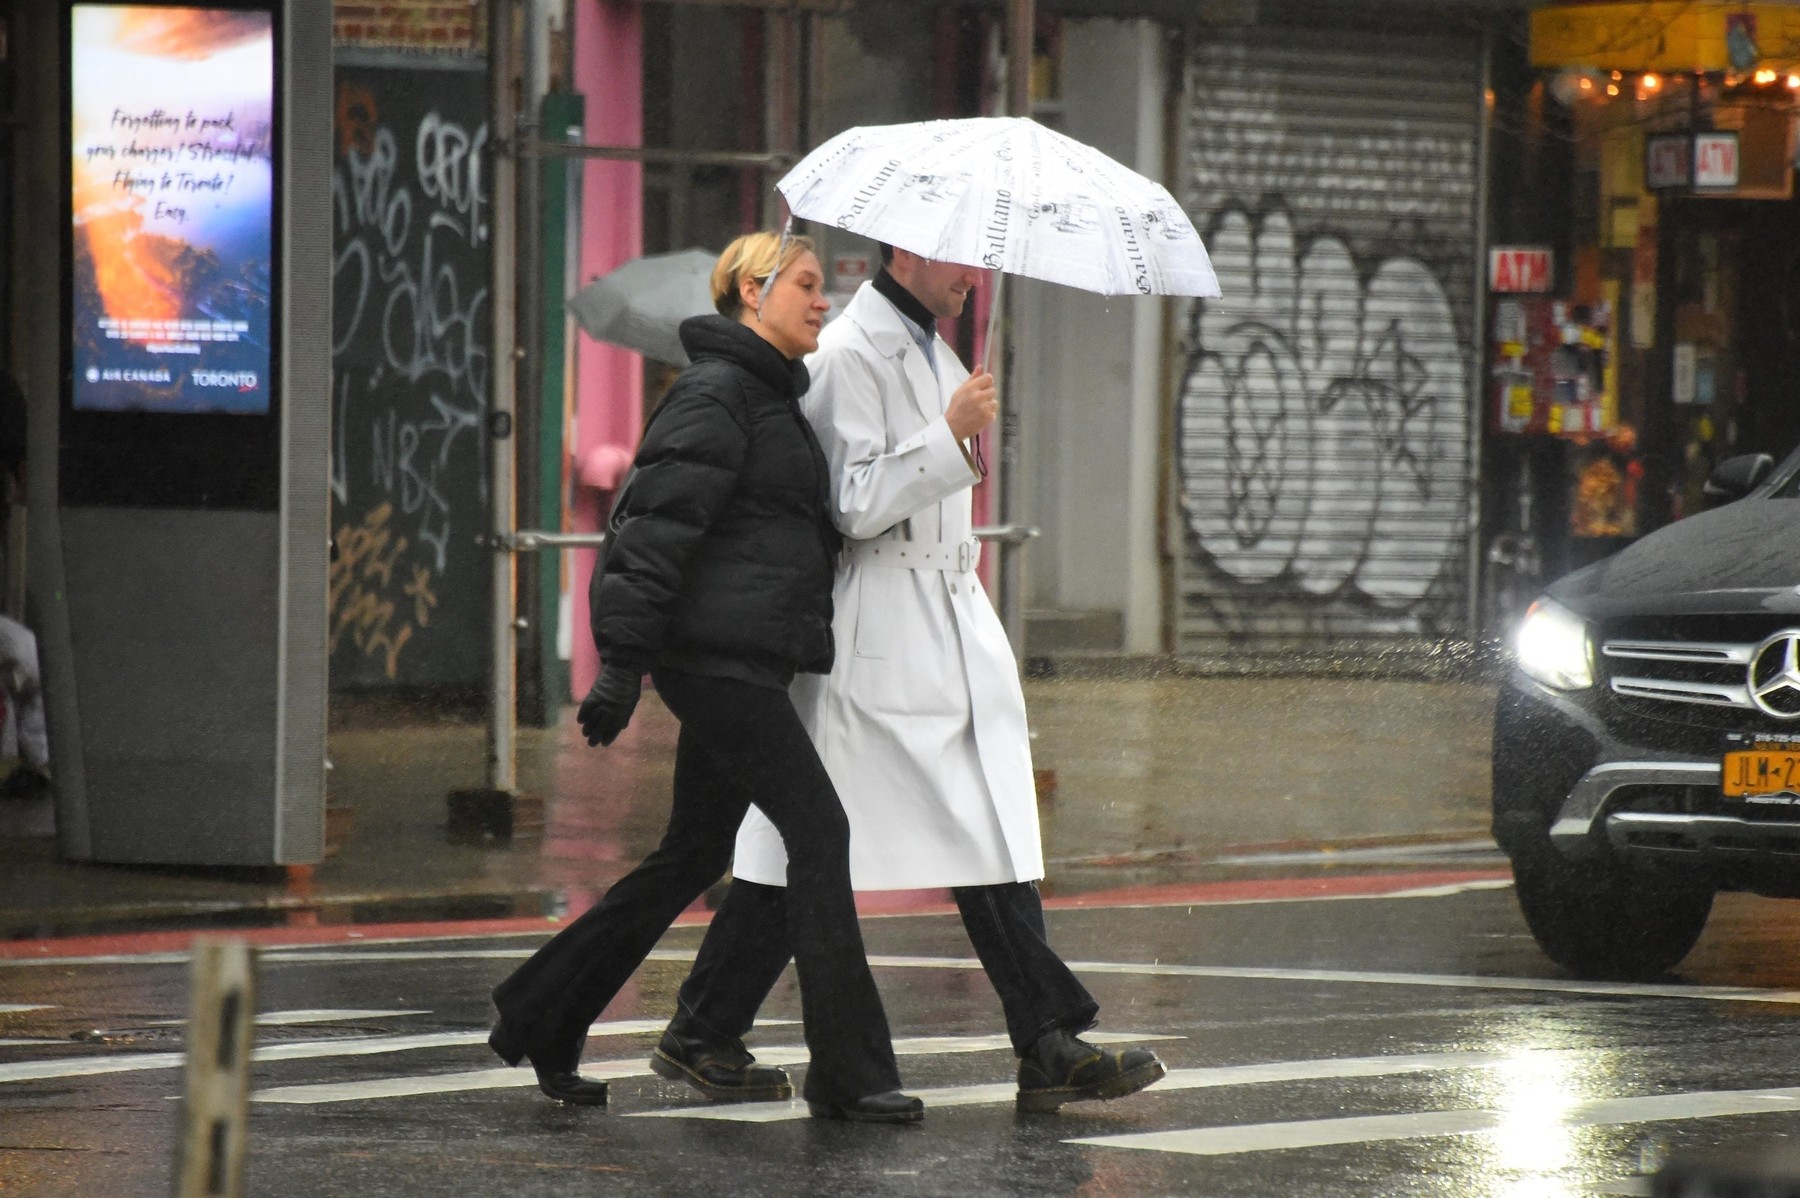 New York, NY  - *EXCLUSIVE*  - Chloe Sevigny and her boyfriend Sinisa Mackovic are seen out in Manhattan. The duo crowd under an umbrella as they brave the rain together.

BACKGRID USA 30 DECEMBER 2019, Image: 490417394, License: Rights-managed, Restrictions: , Model Release: no, Credit line: JosiahW / BACKGRID / Backgrid USA / Profimedia